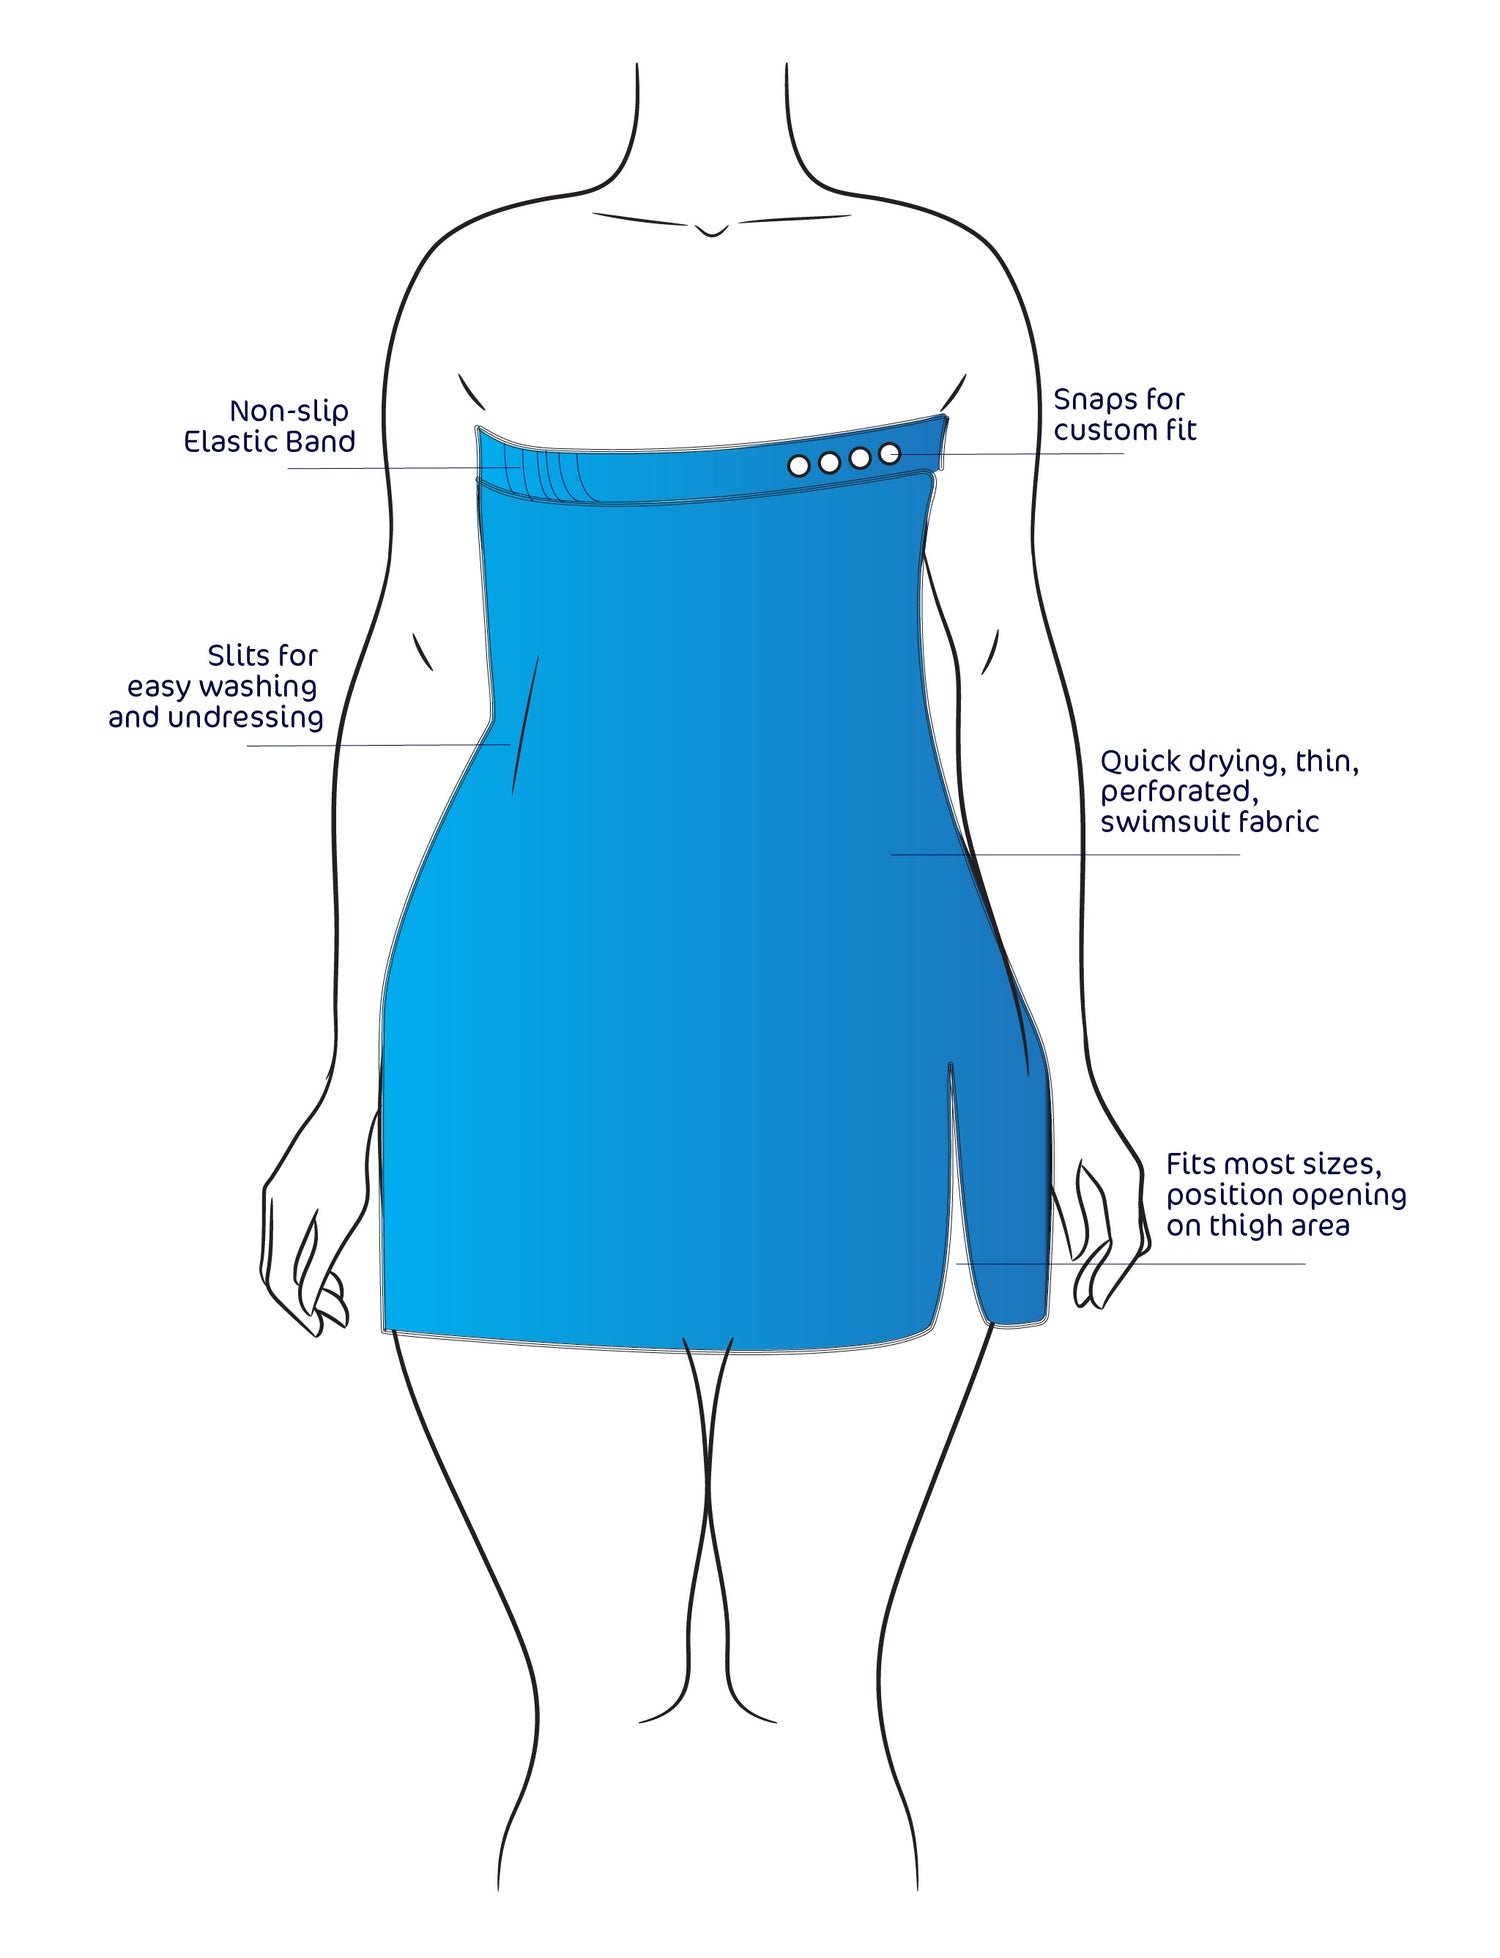 Graphic of a blue bath cover up on a woman figure showing the benefits. 1- a non-slip elastic band, 2- Slits for easy washing and undressing, 3- Snaps for custom fit, 4- Fits most sizes, and 5- quick drying fabric